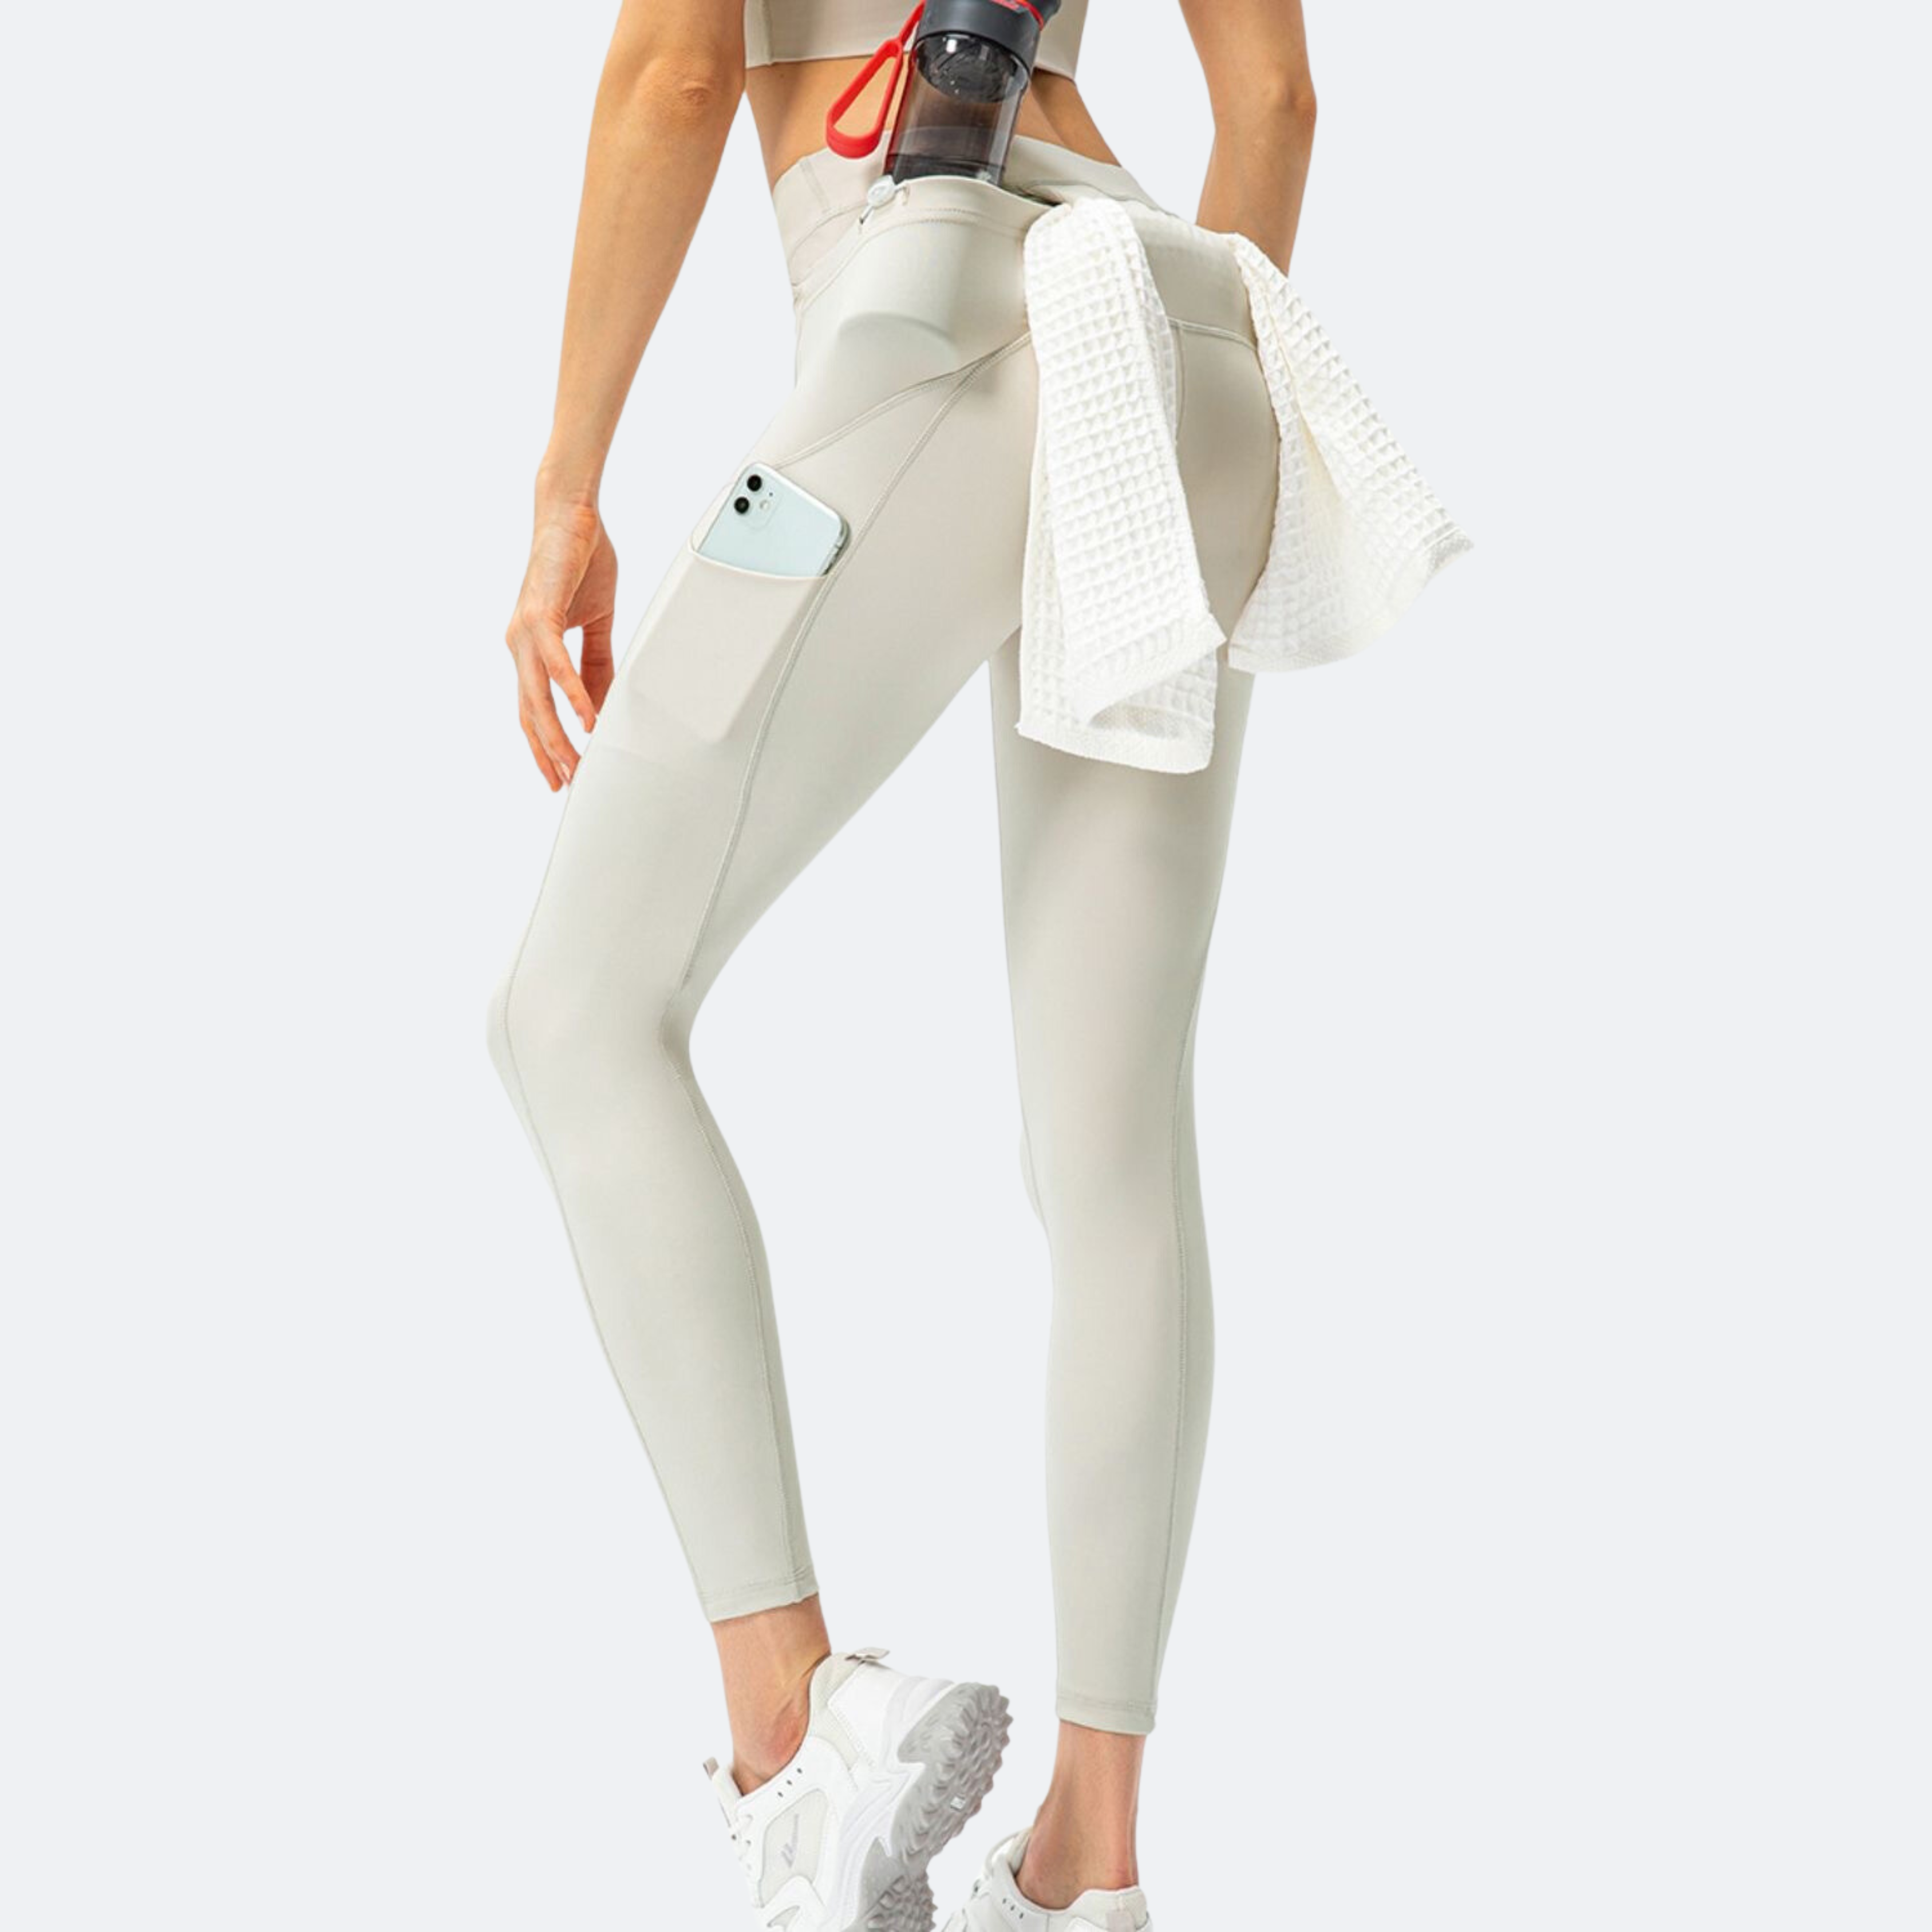 The Nuclear Power Leggings with Pockets